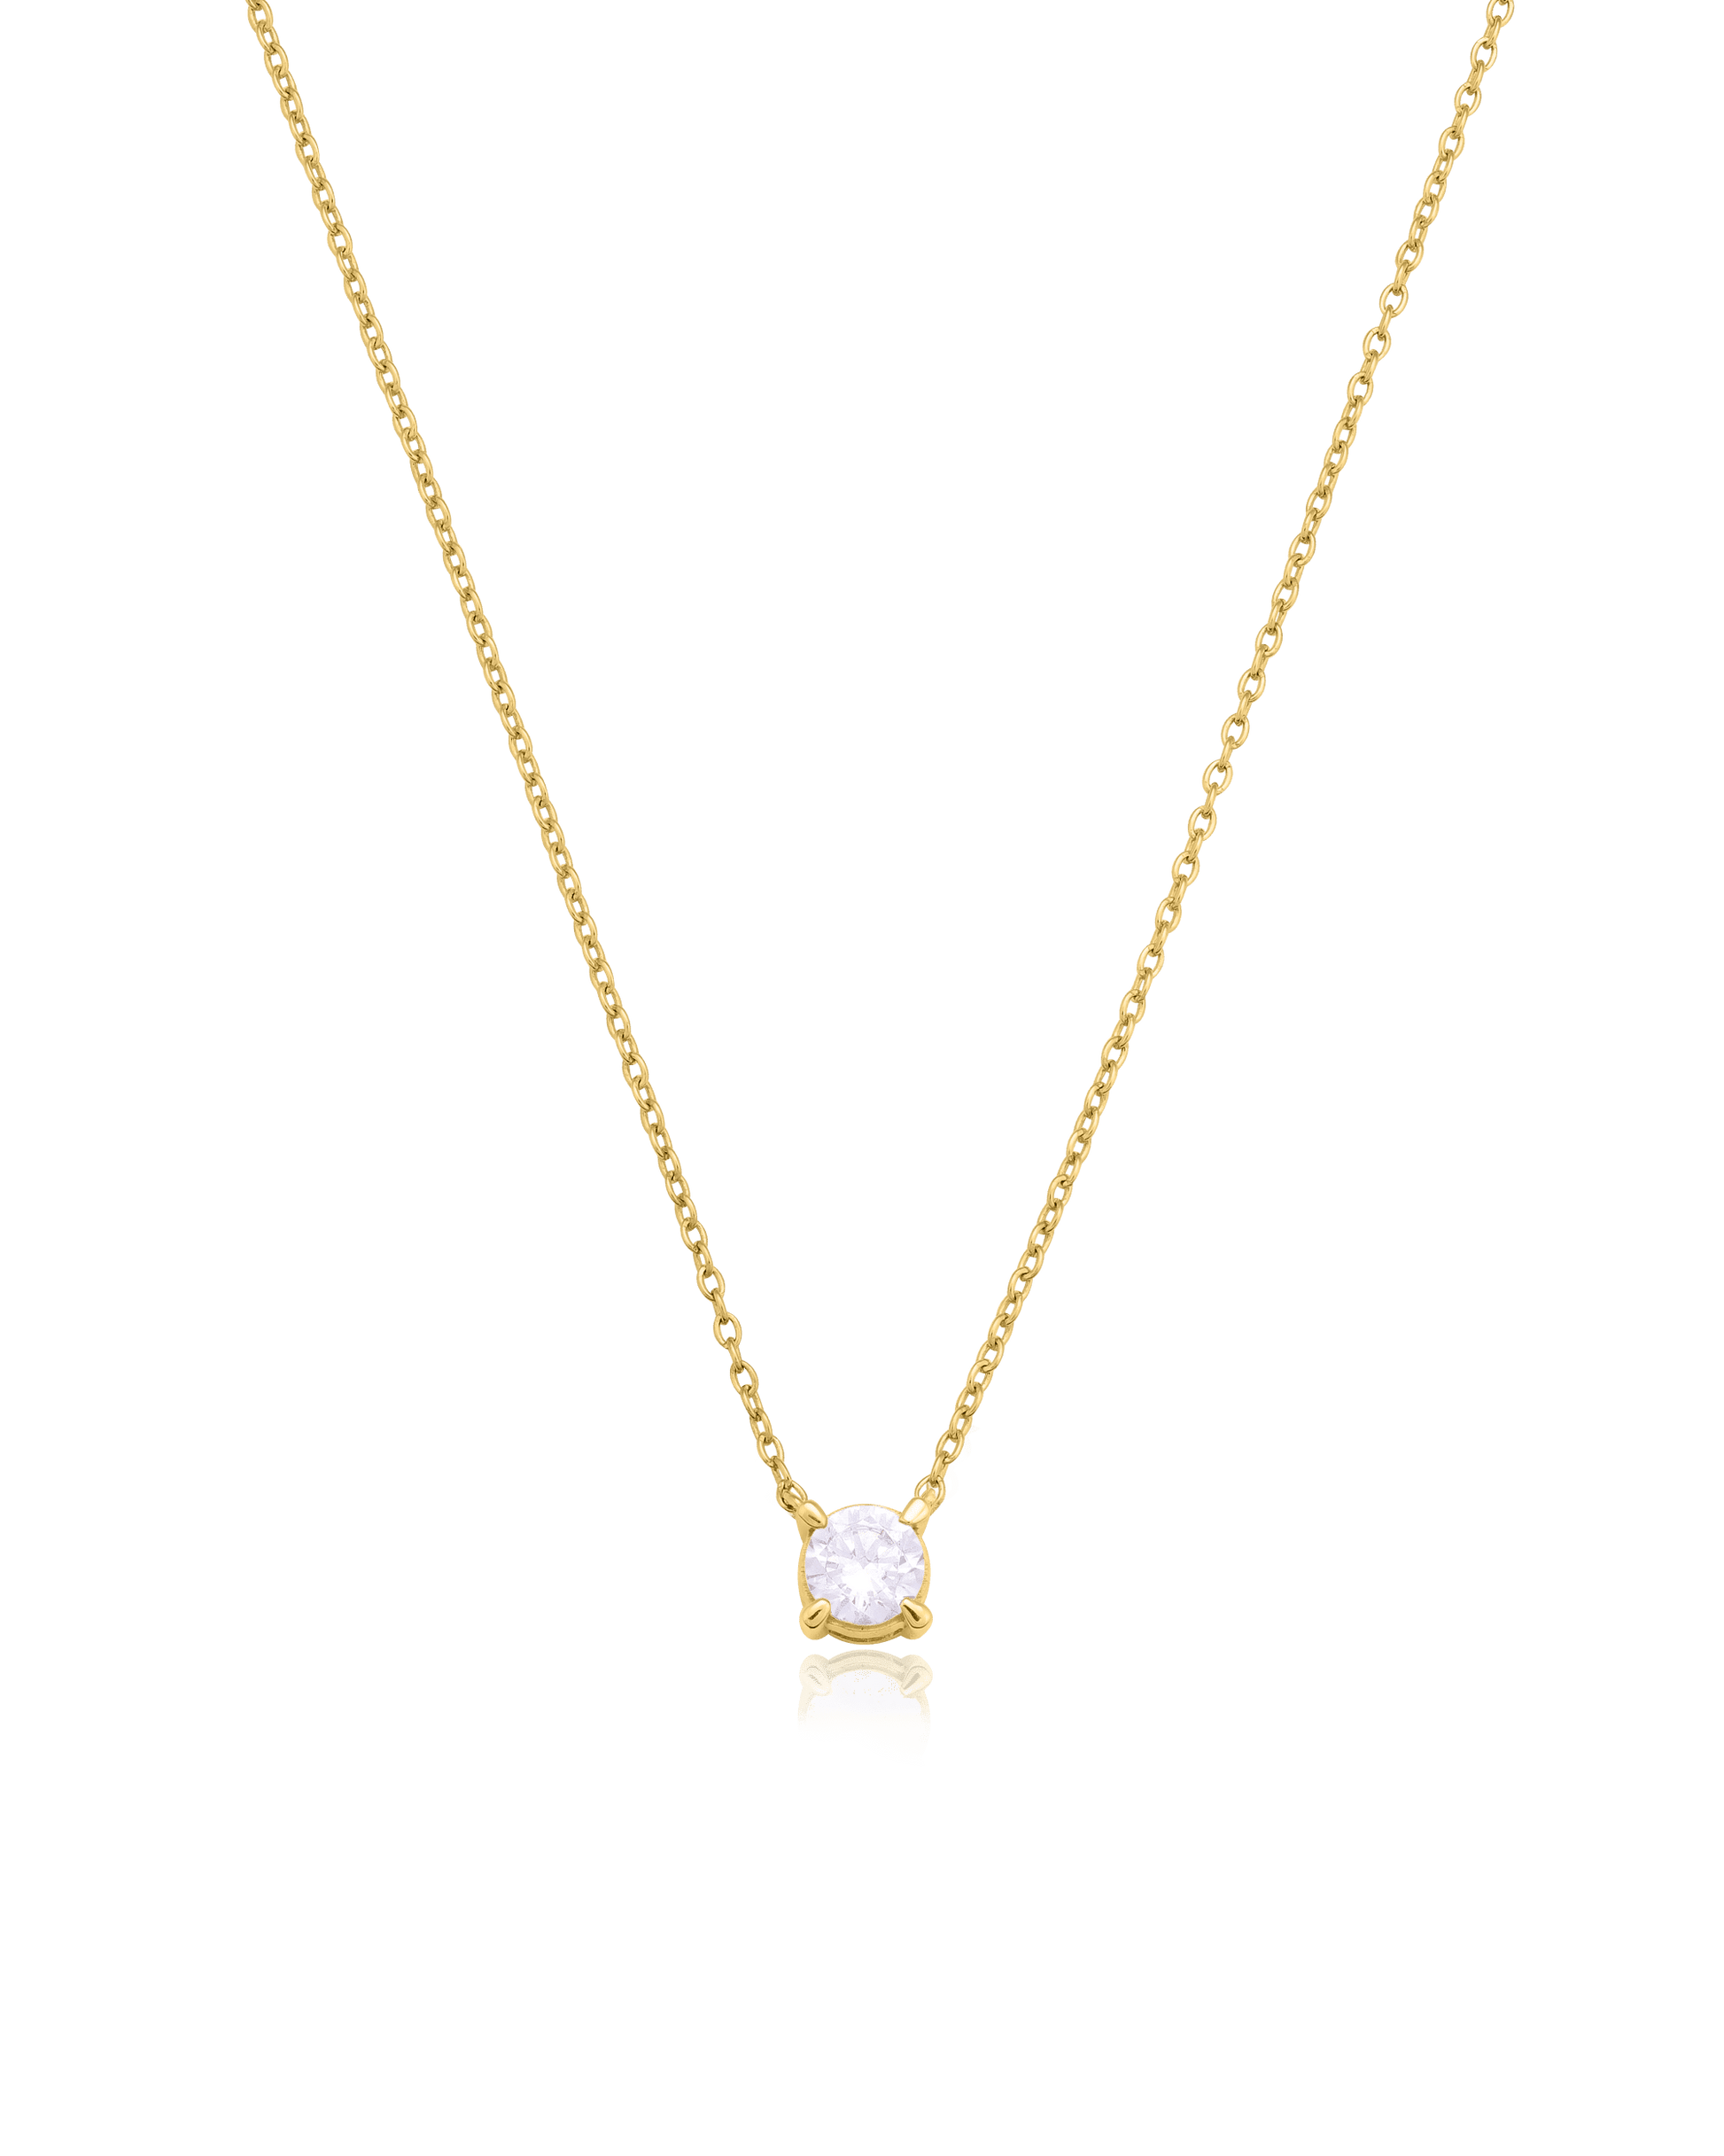 Diamond Solitaire Necklace - 14K Yellow Gold Necklaces magal-dev 0.10 CT 16” 